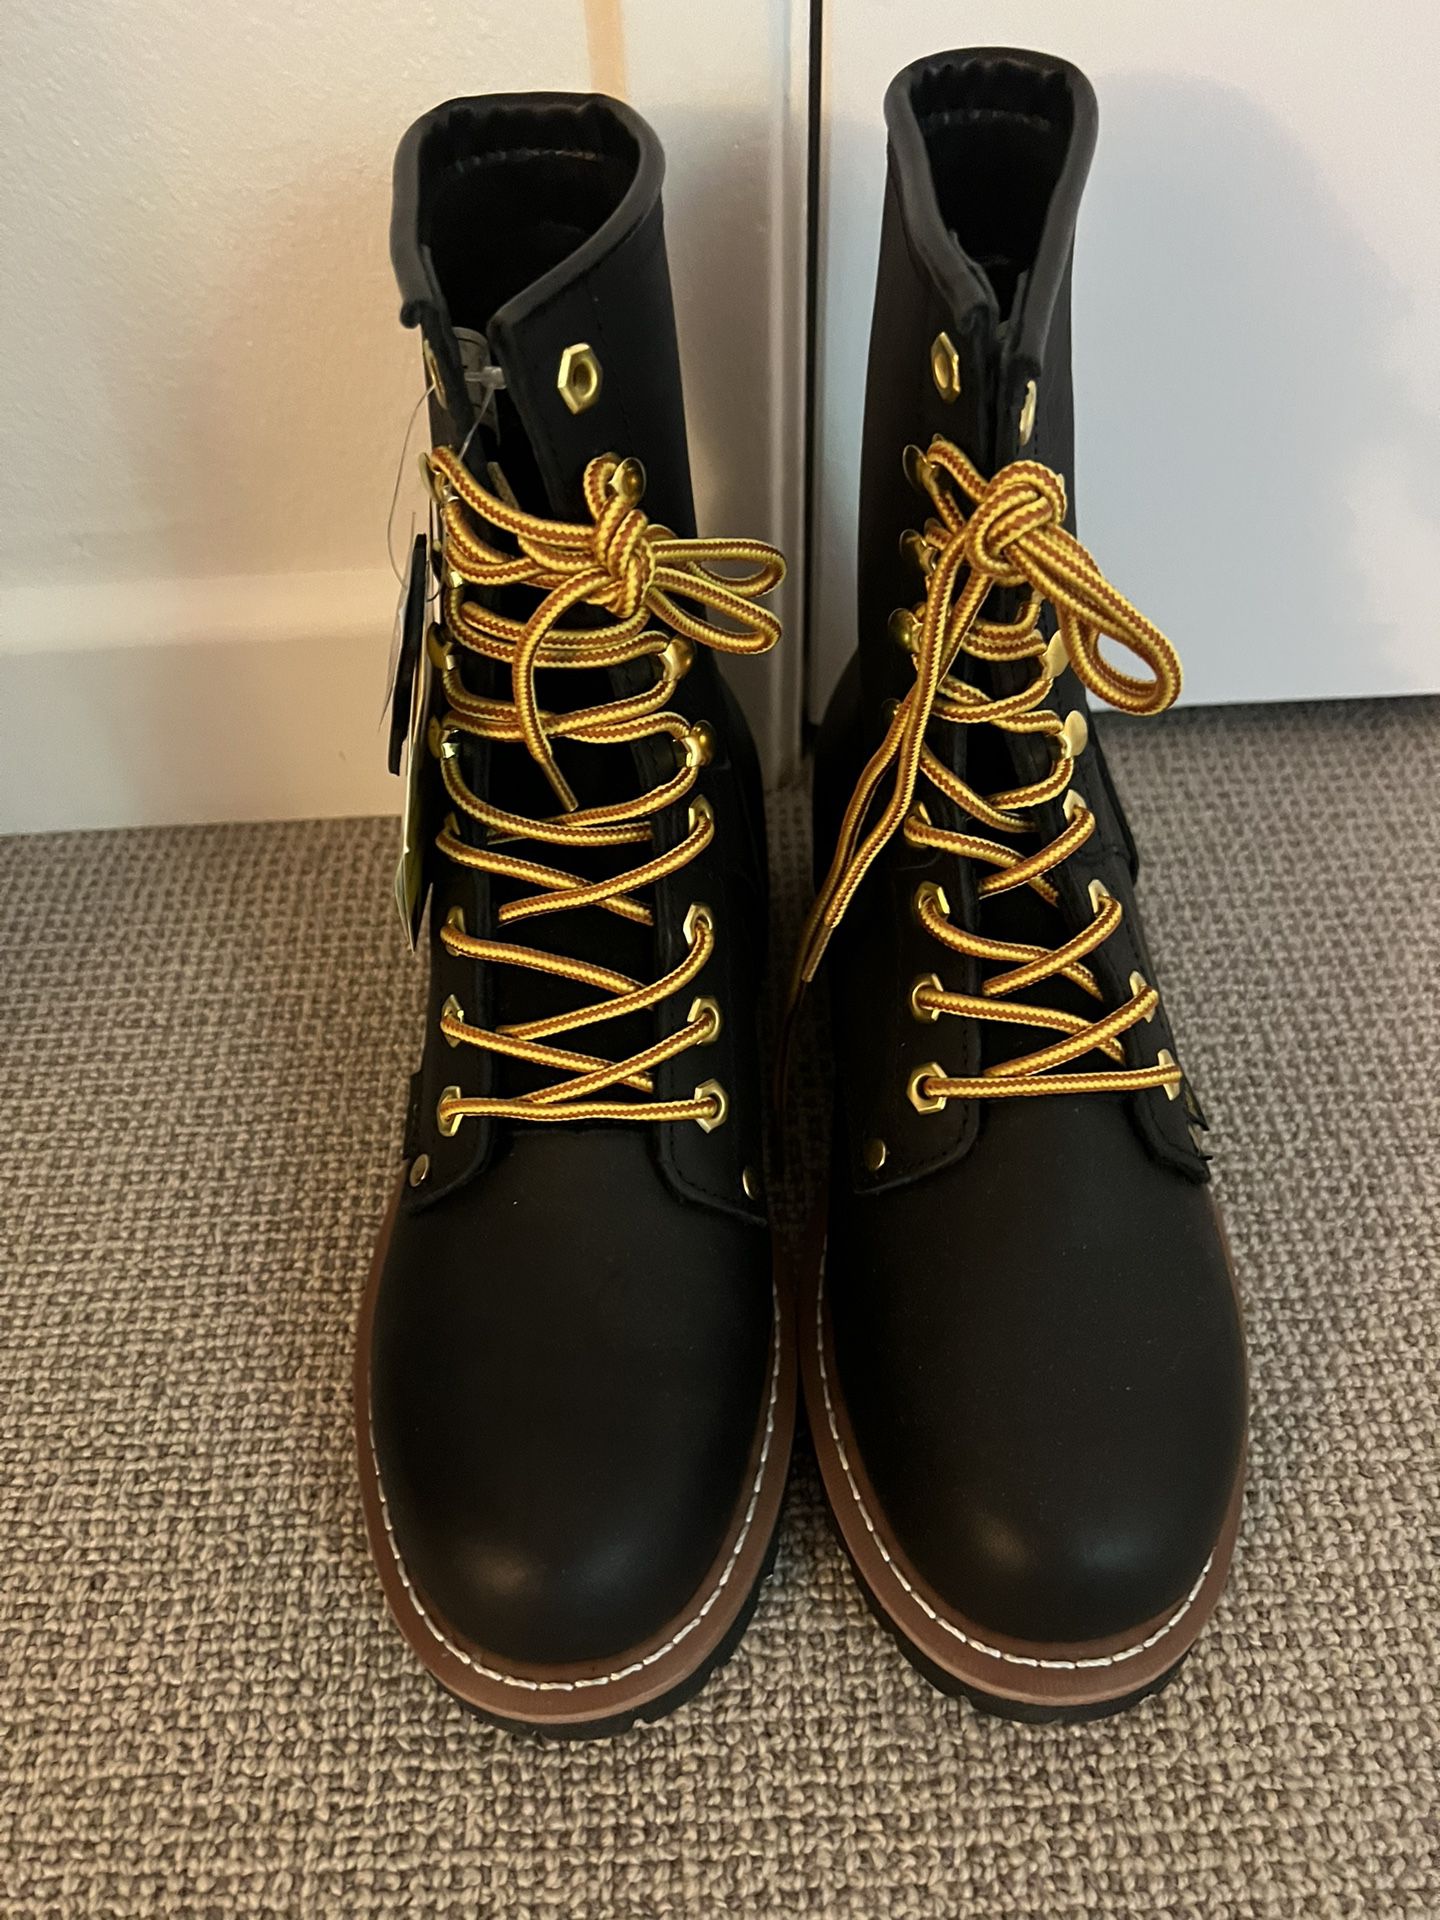 New Work Boots